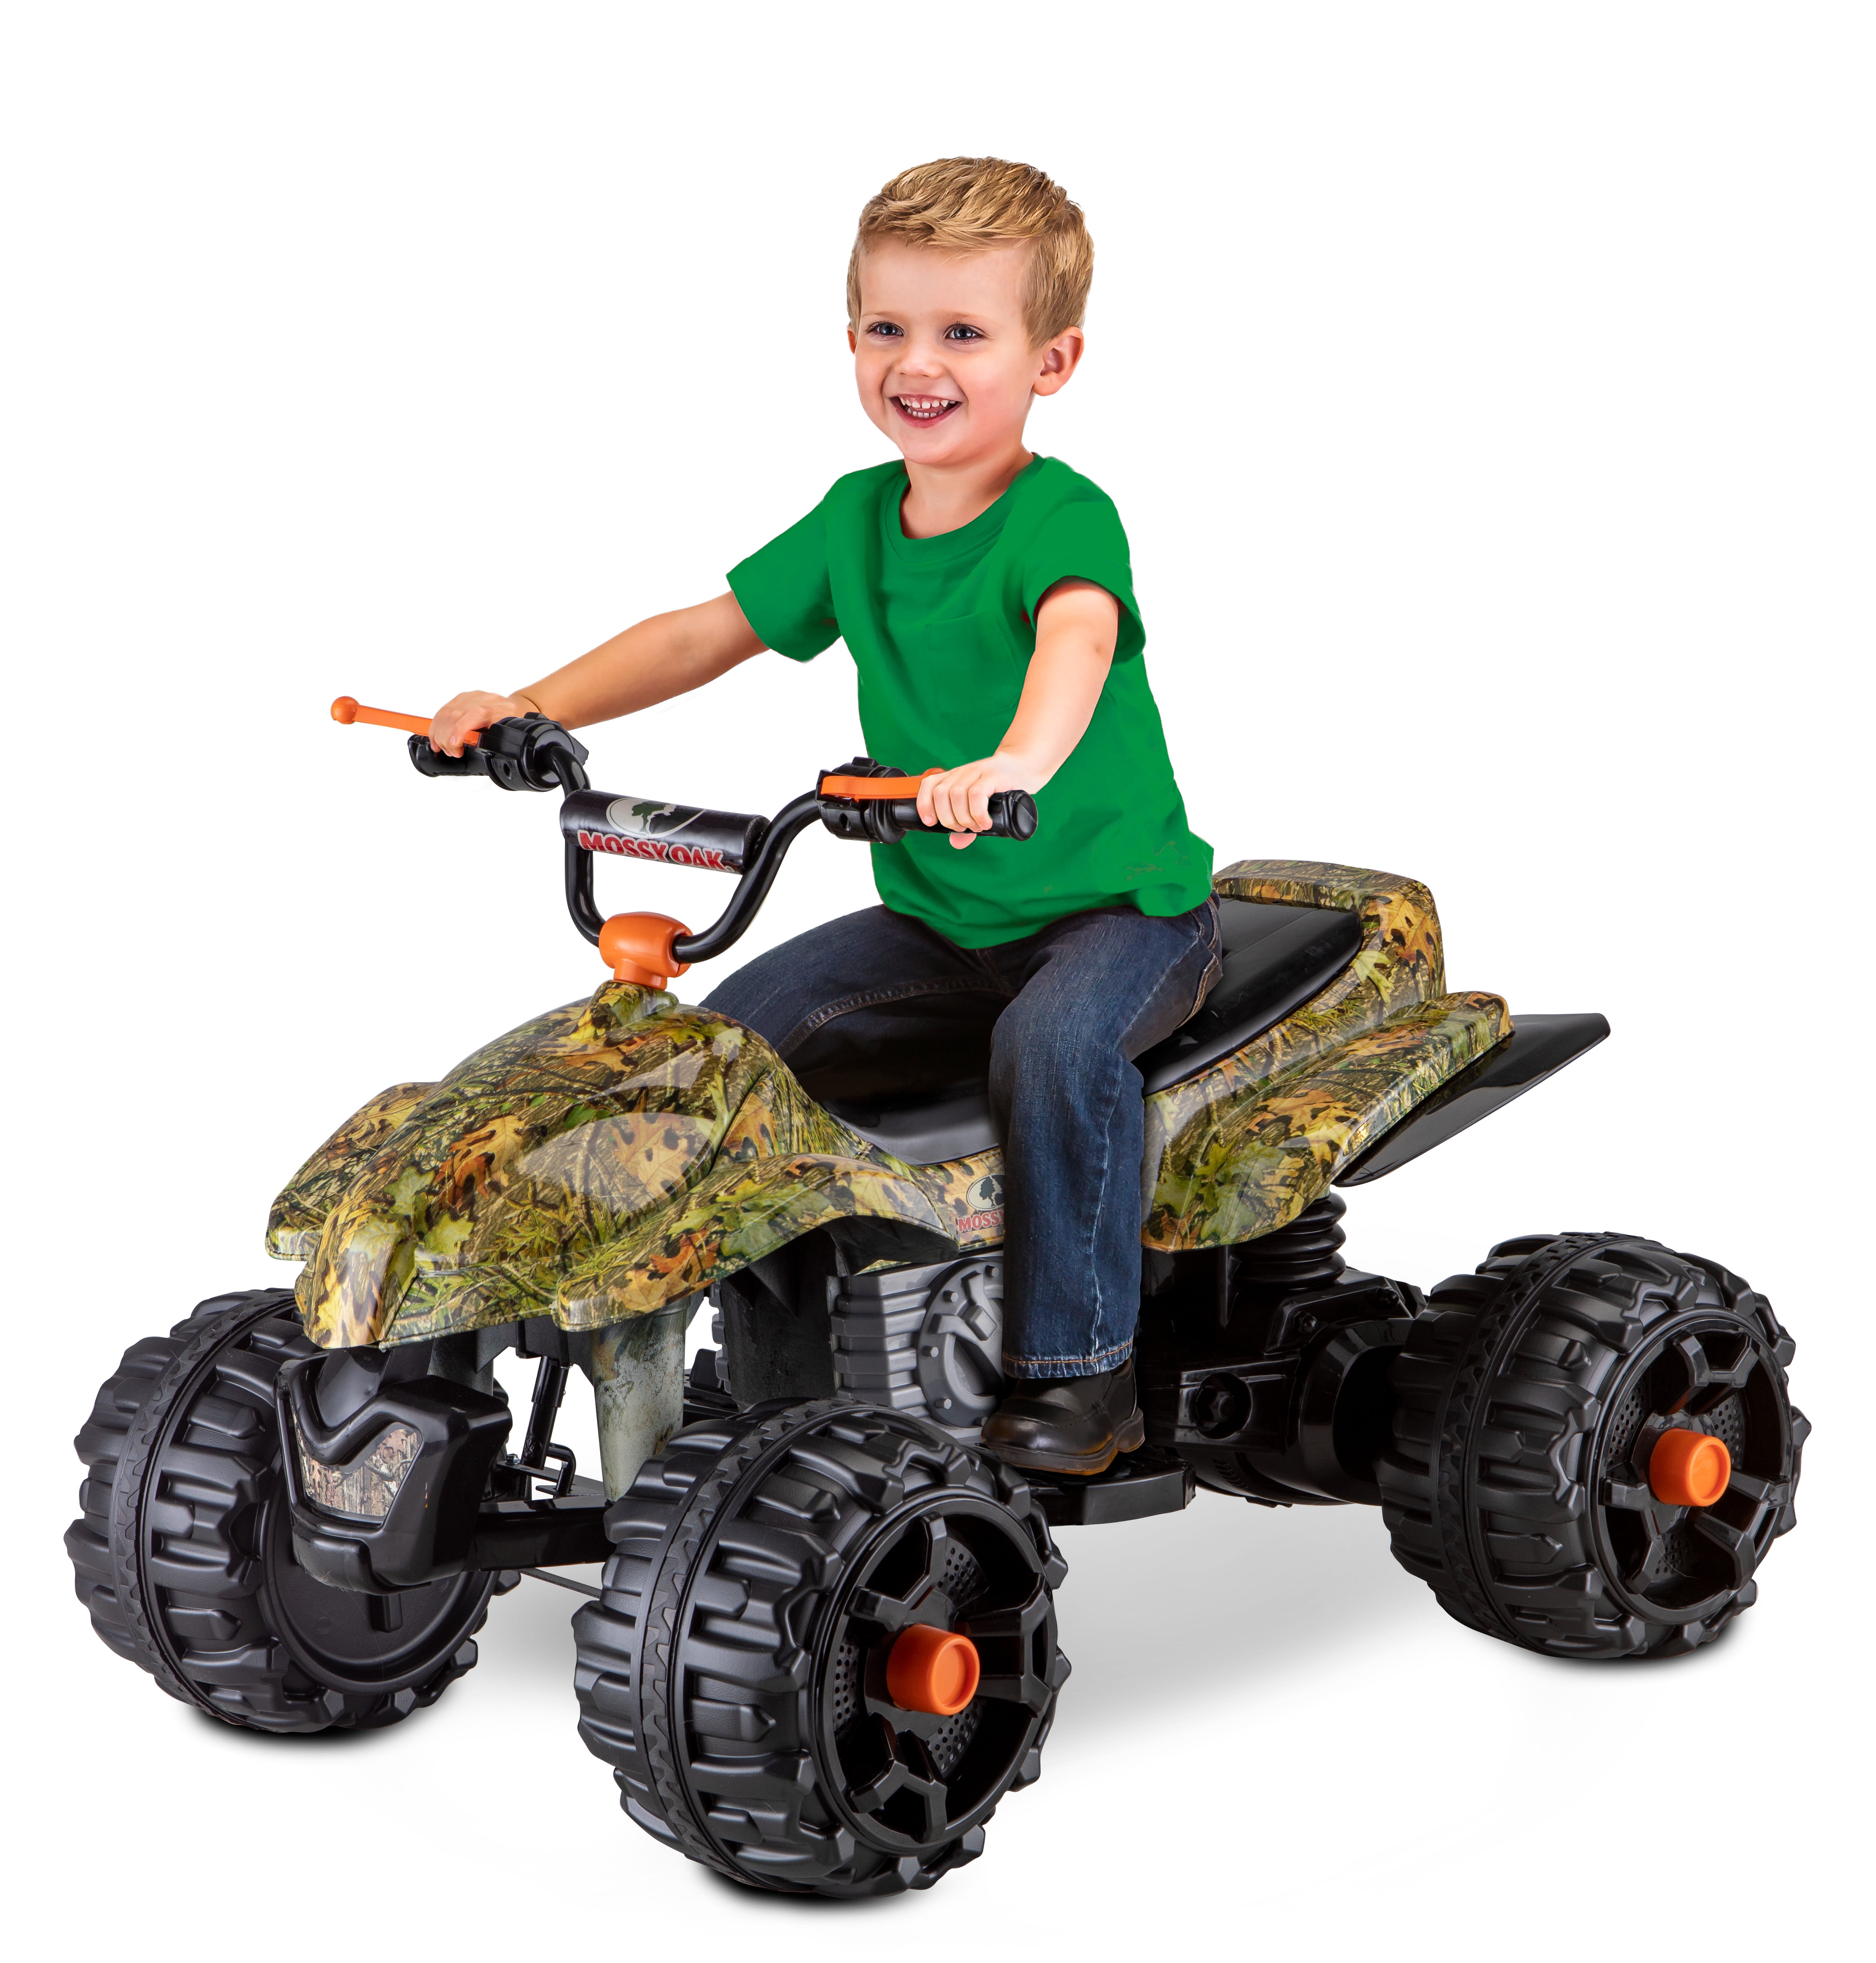 Green/Brown Foot Pedal Acceleration for Forward & Reverse Driving with 12V Battery Kid Trax Mossy Oak Dune Buggy Ride-On Toy for Kids & Children Ages 3-7 Years Old with Room for Two Riders 